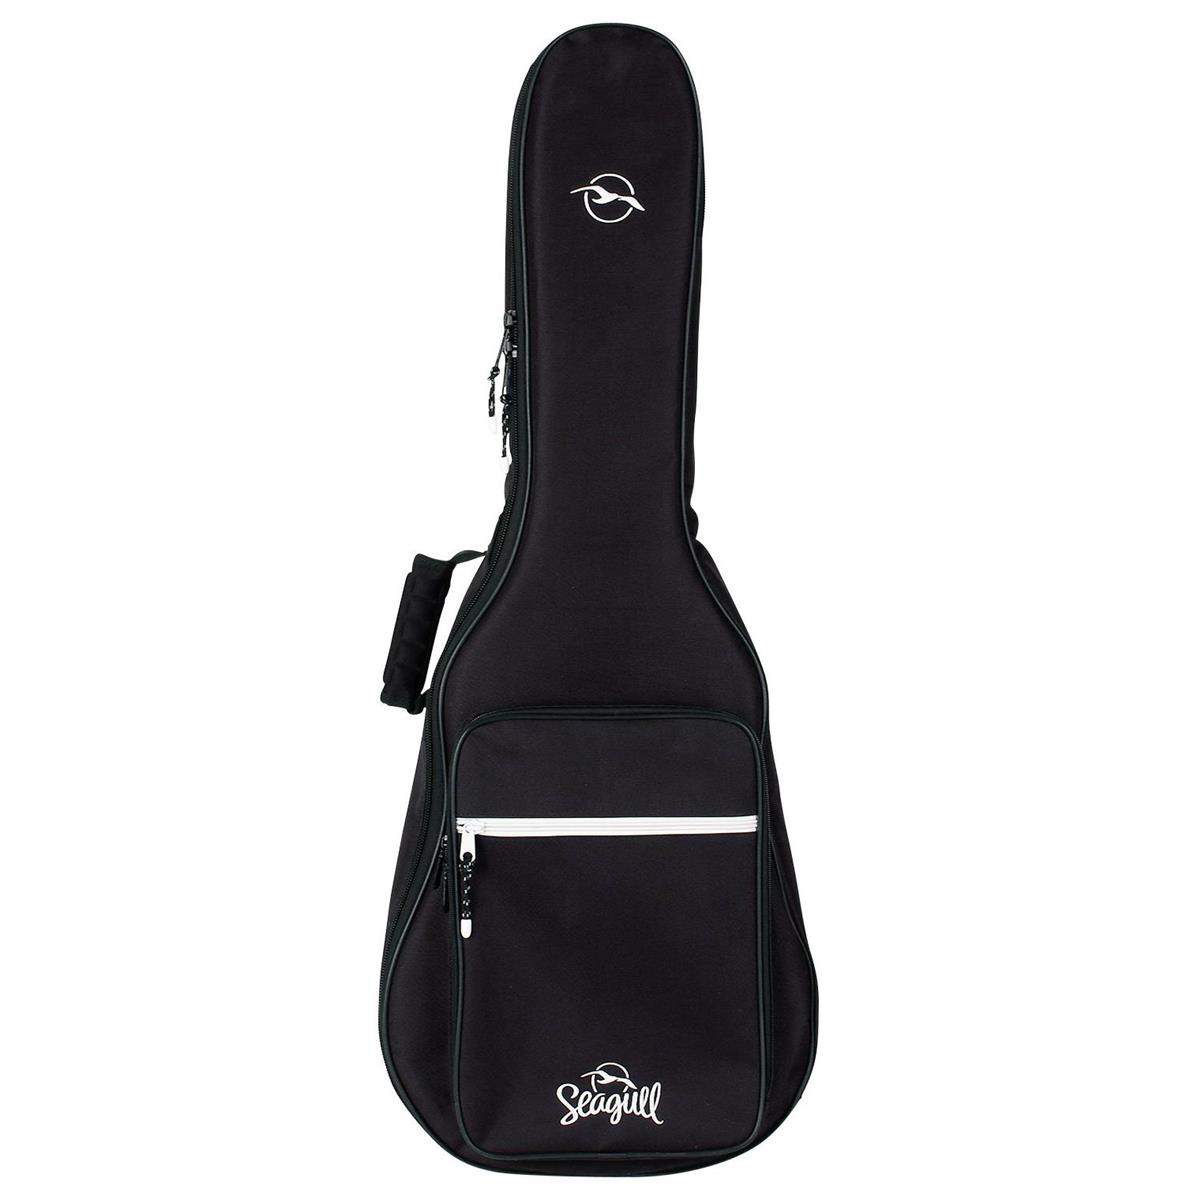 Seagull The Standard Series Parlor/Grand Size Acoustic Guitar Gig Bag with Logo -  040766